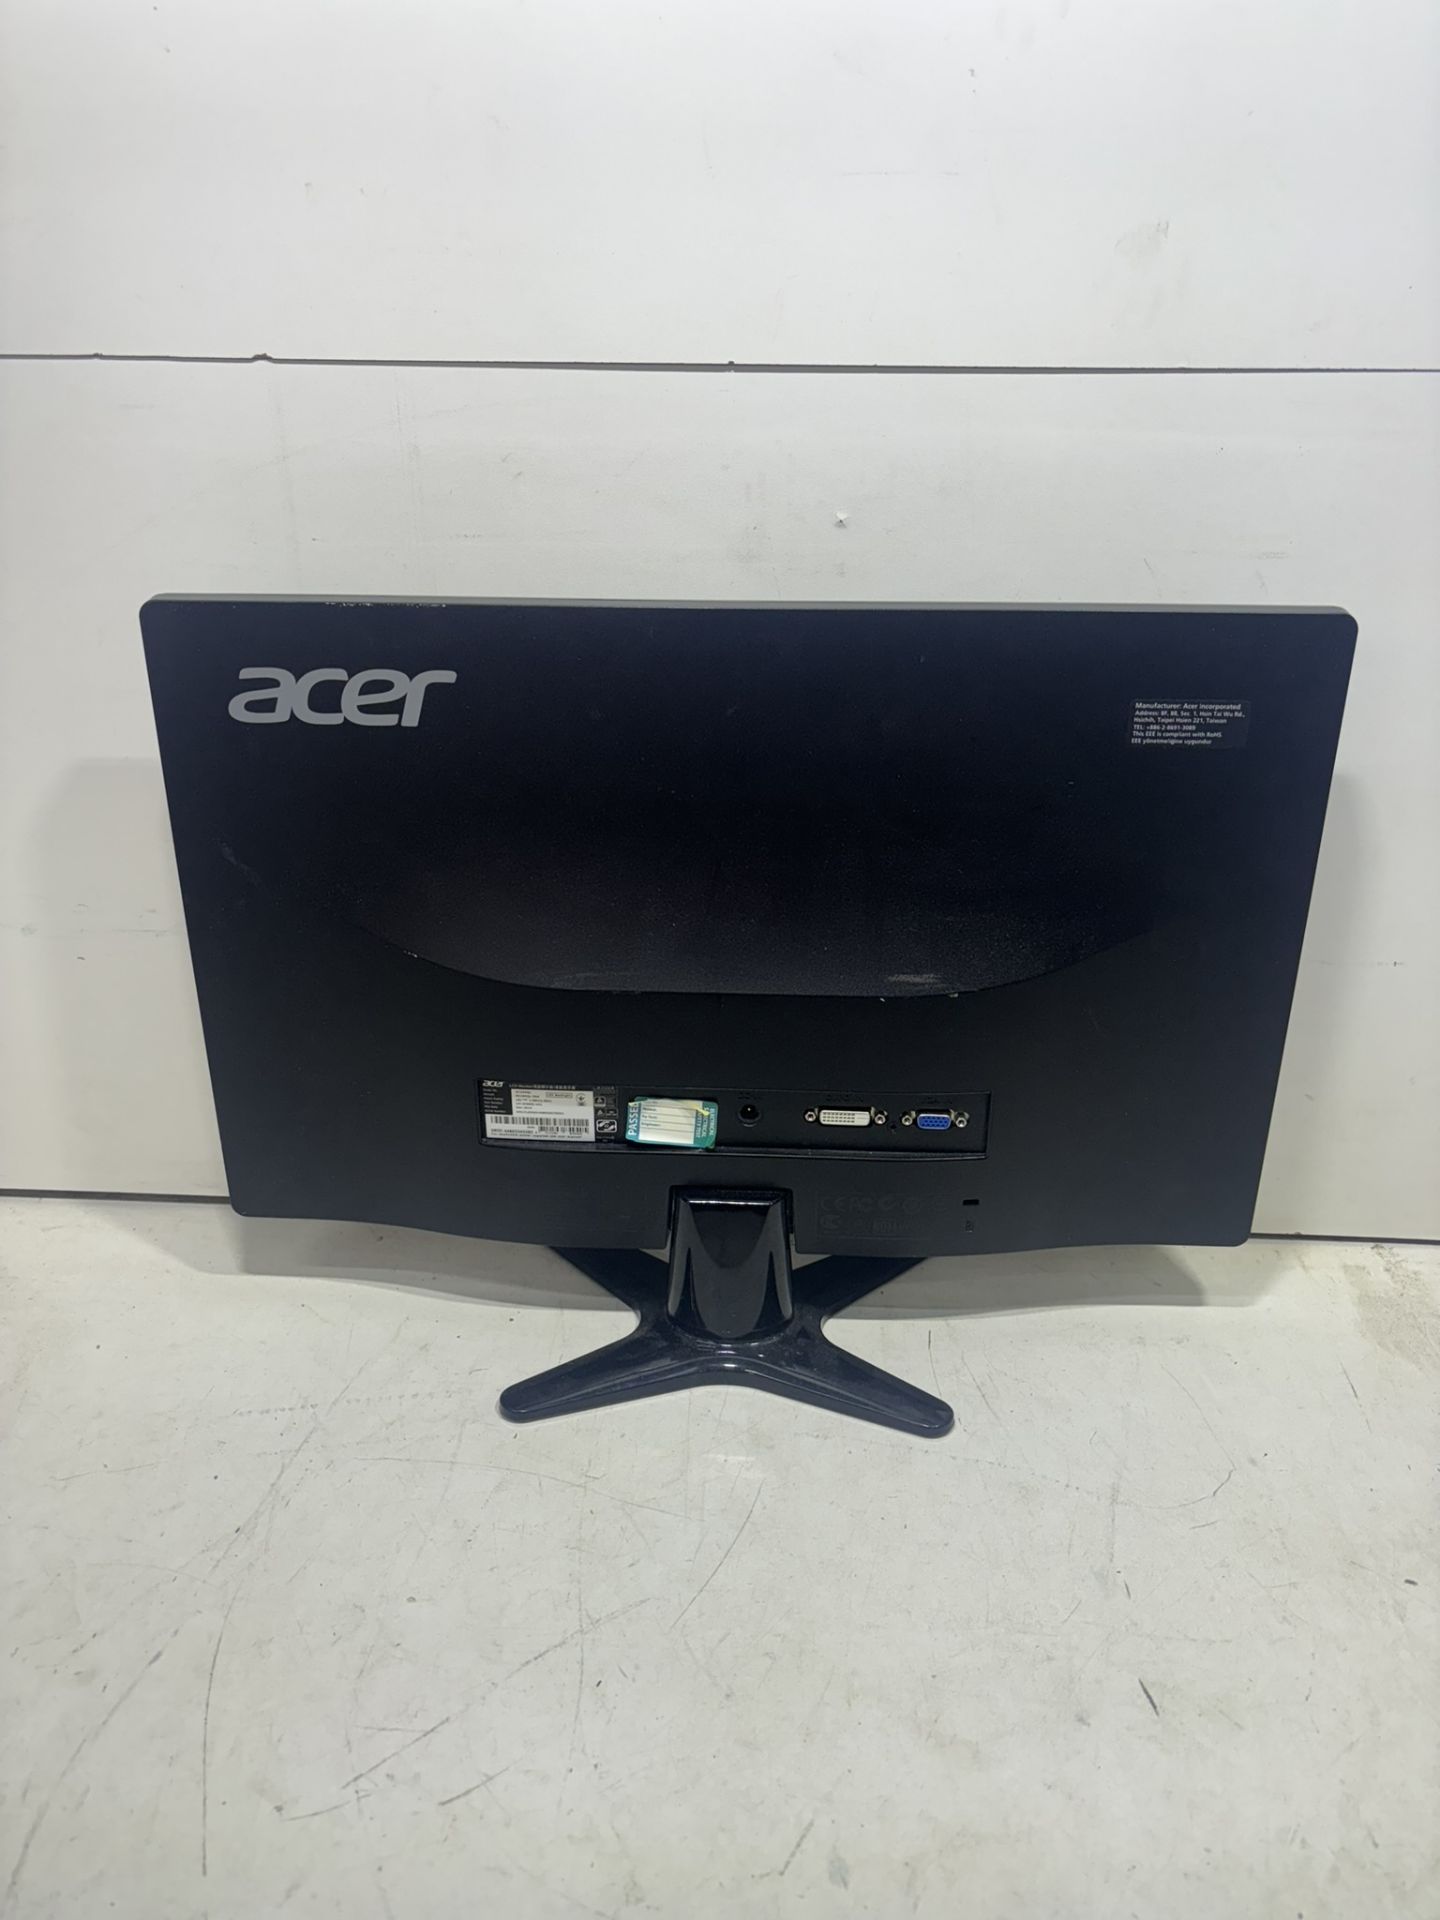 4 x Acer G226HQL 21.5-Inch Screen LED Monitors - Image 2 of 4